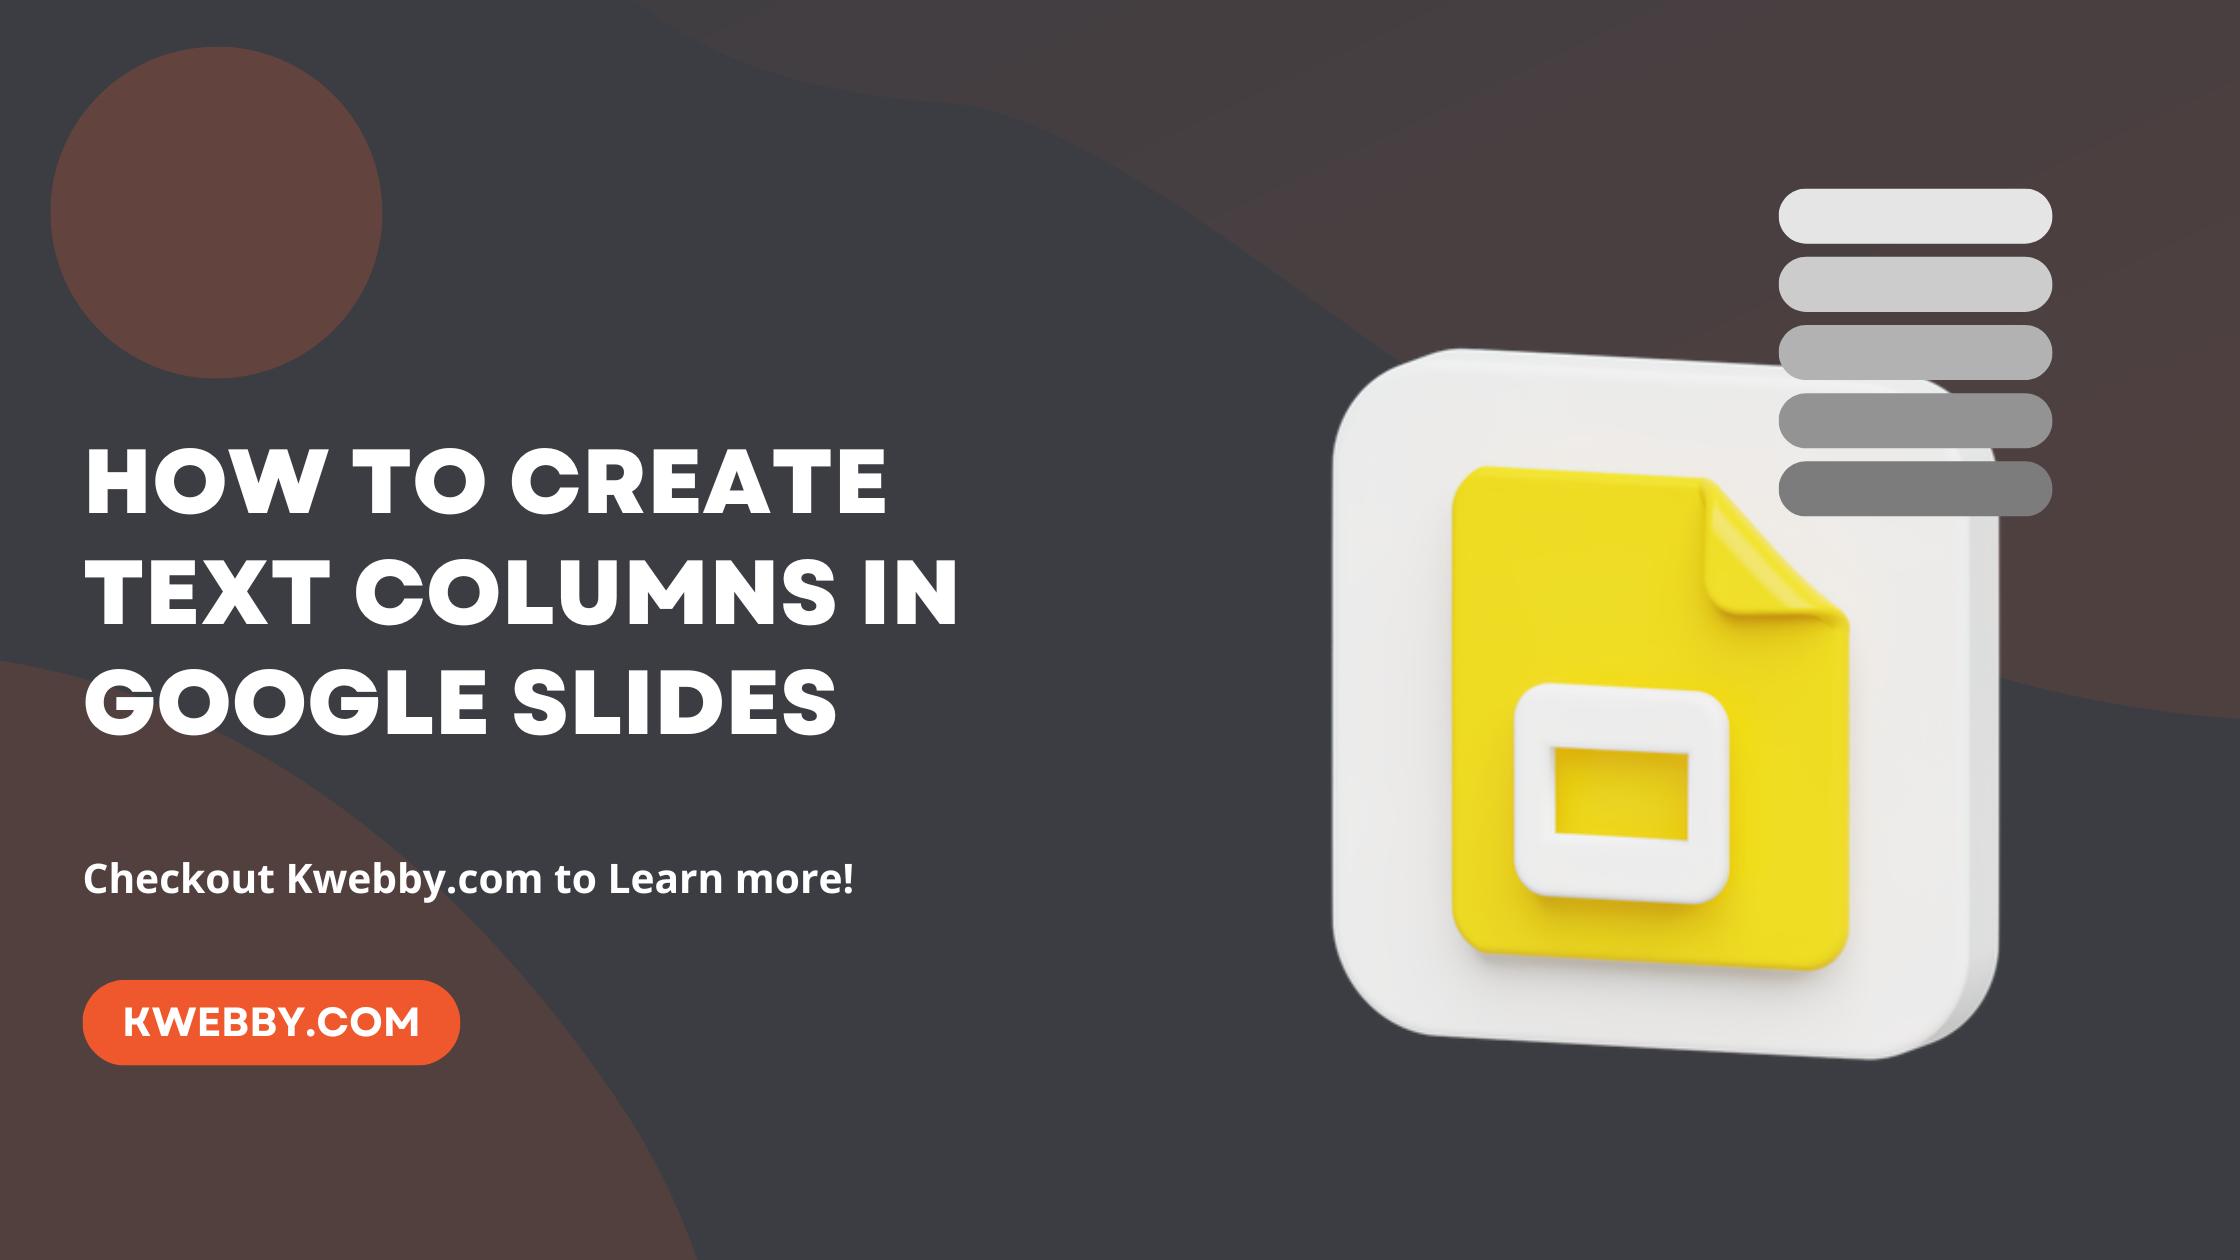 How to Create Text Columns in Google Slides in 3 Steps